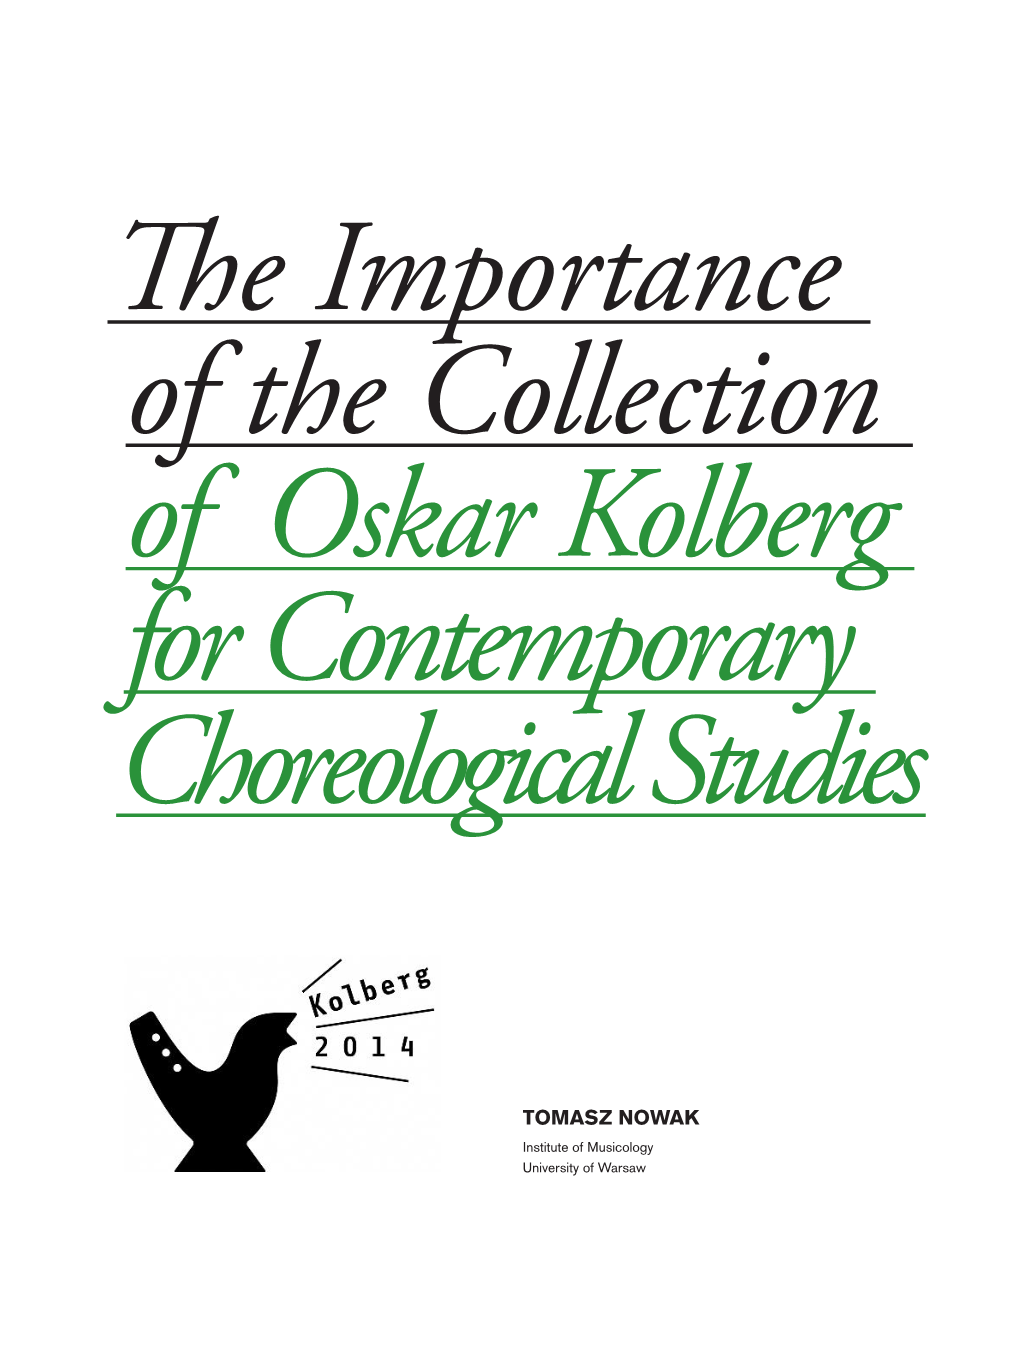 Tomasz NOWAK Institute of Musicology University of Warsaw the Importance of the Collection of Oskar Kolberg for Contemporary Choreological Studies